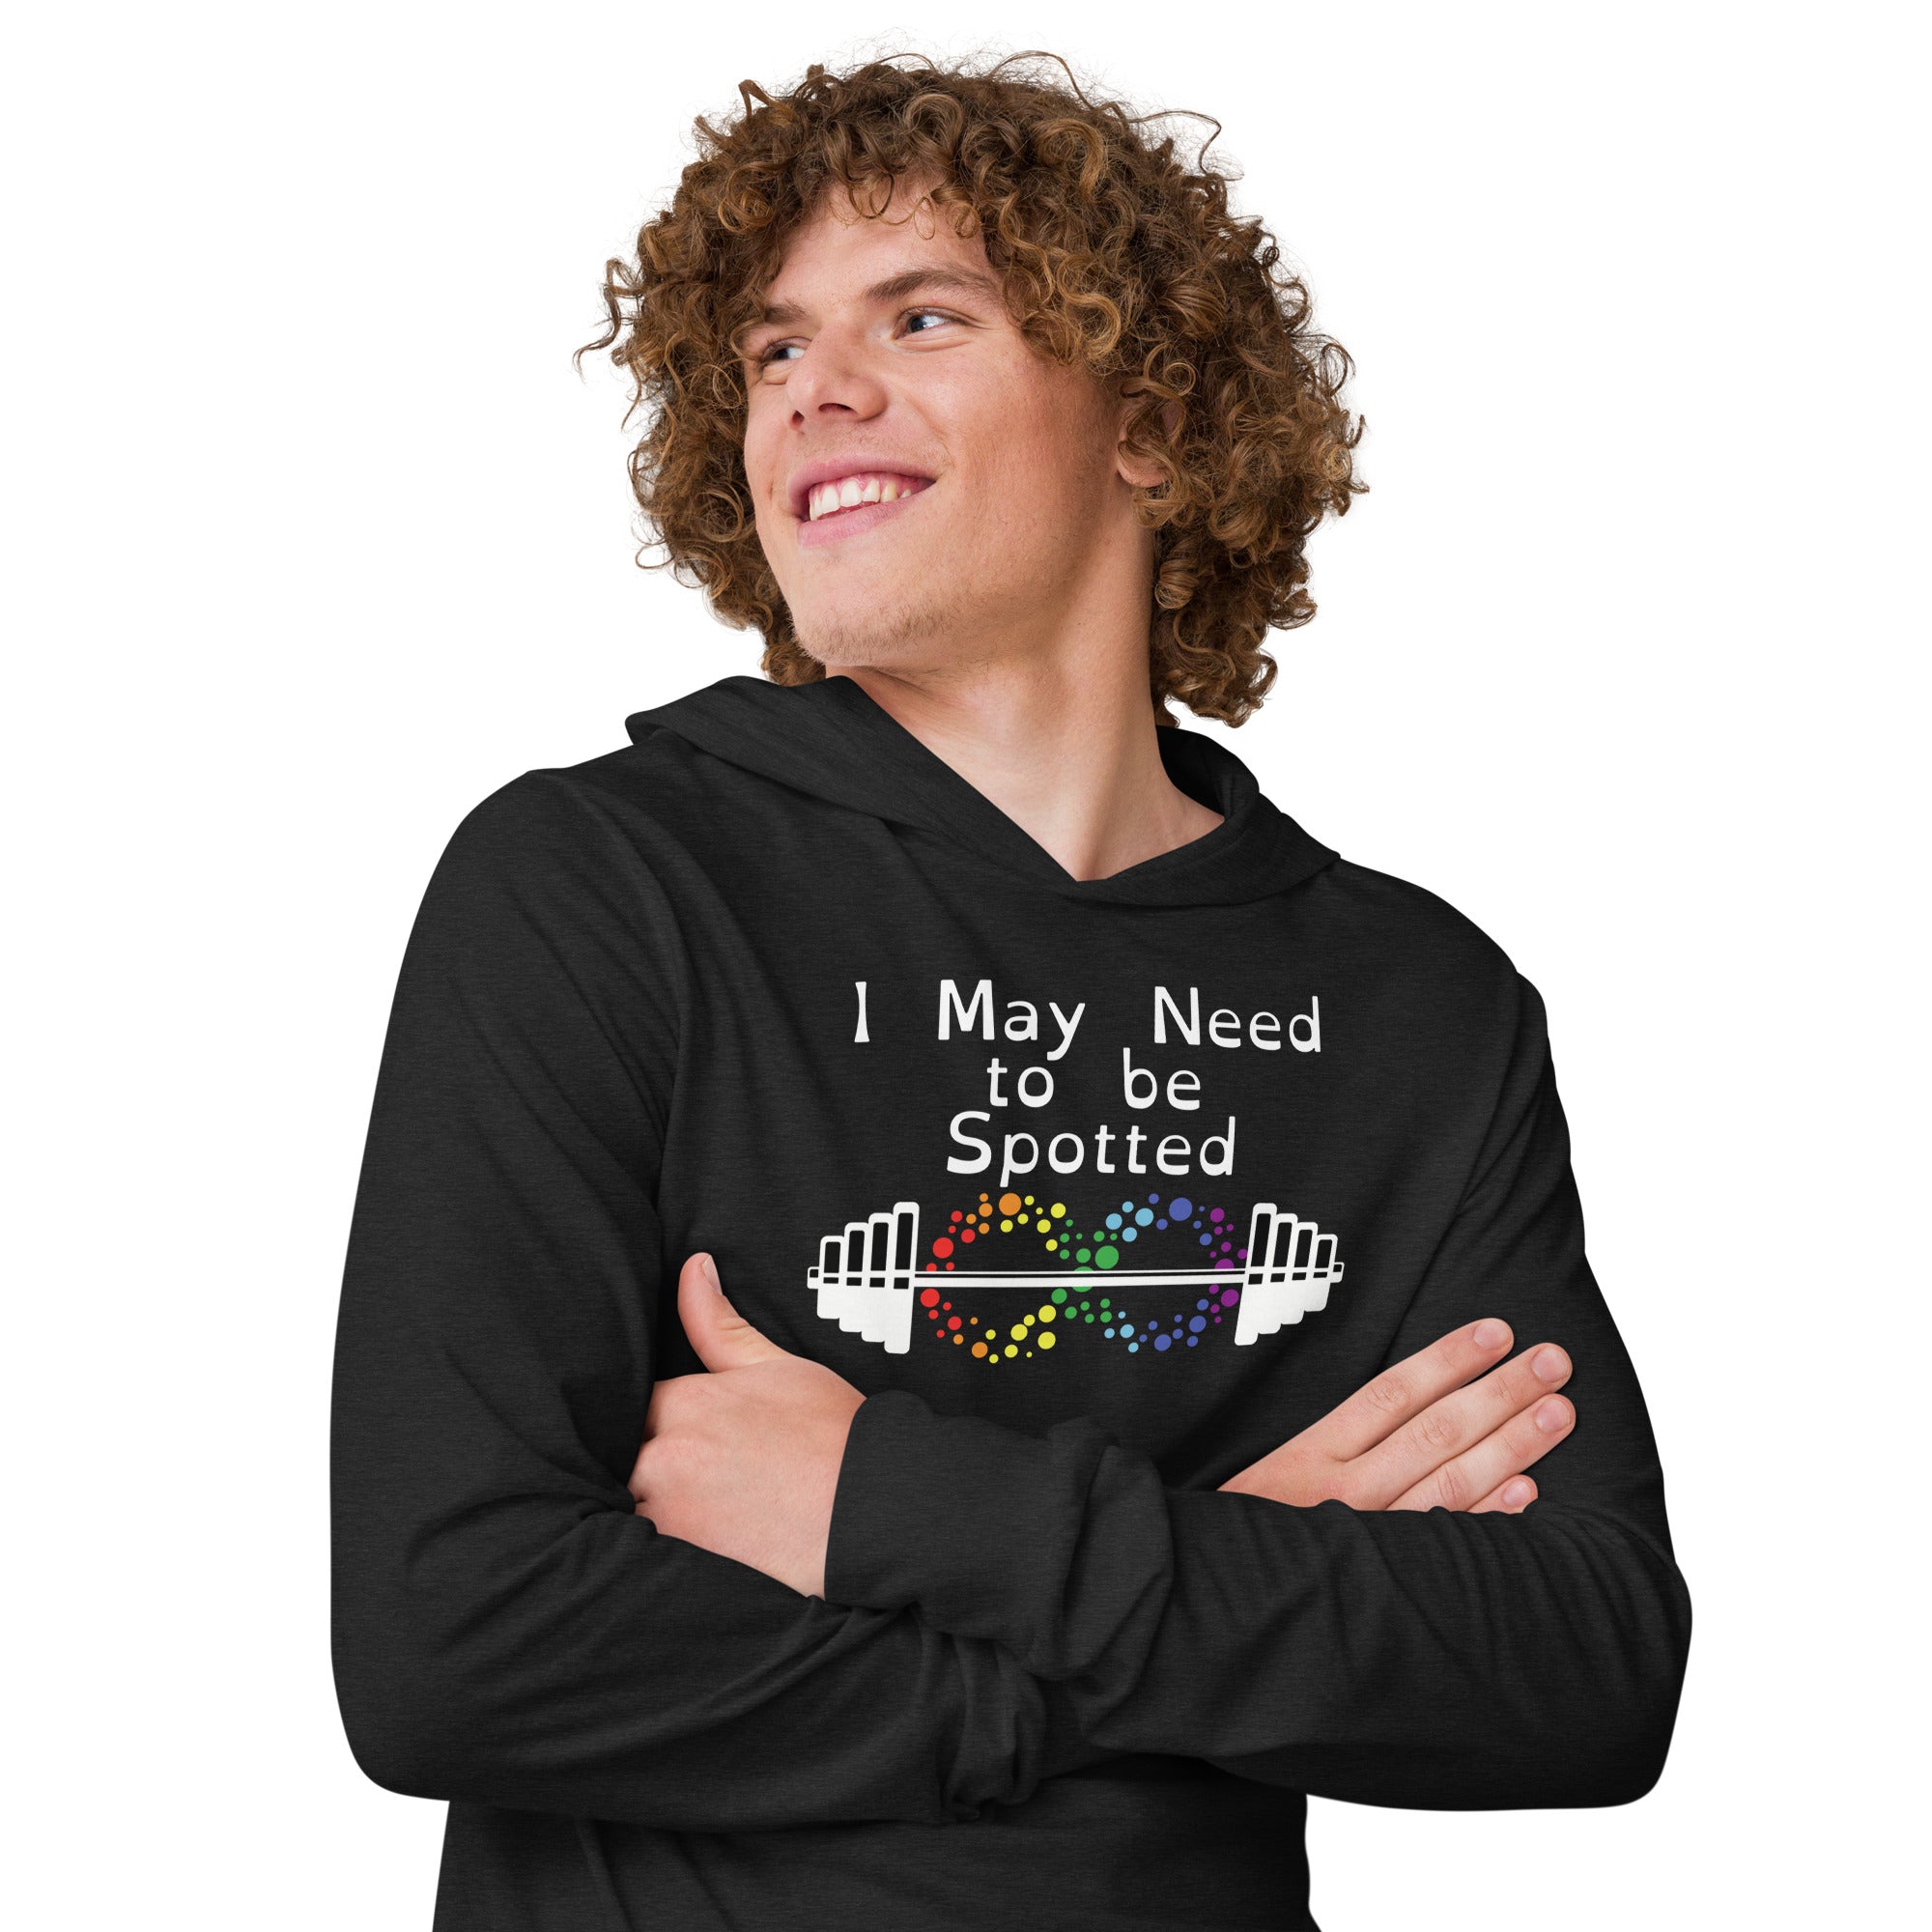 I May Need to be Spotted Hooded long-sleeve tee